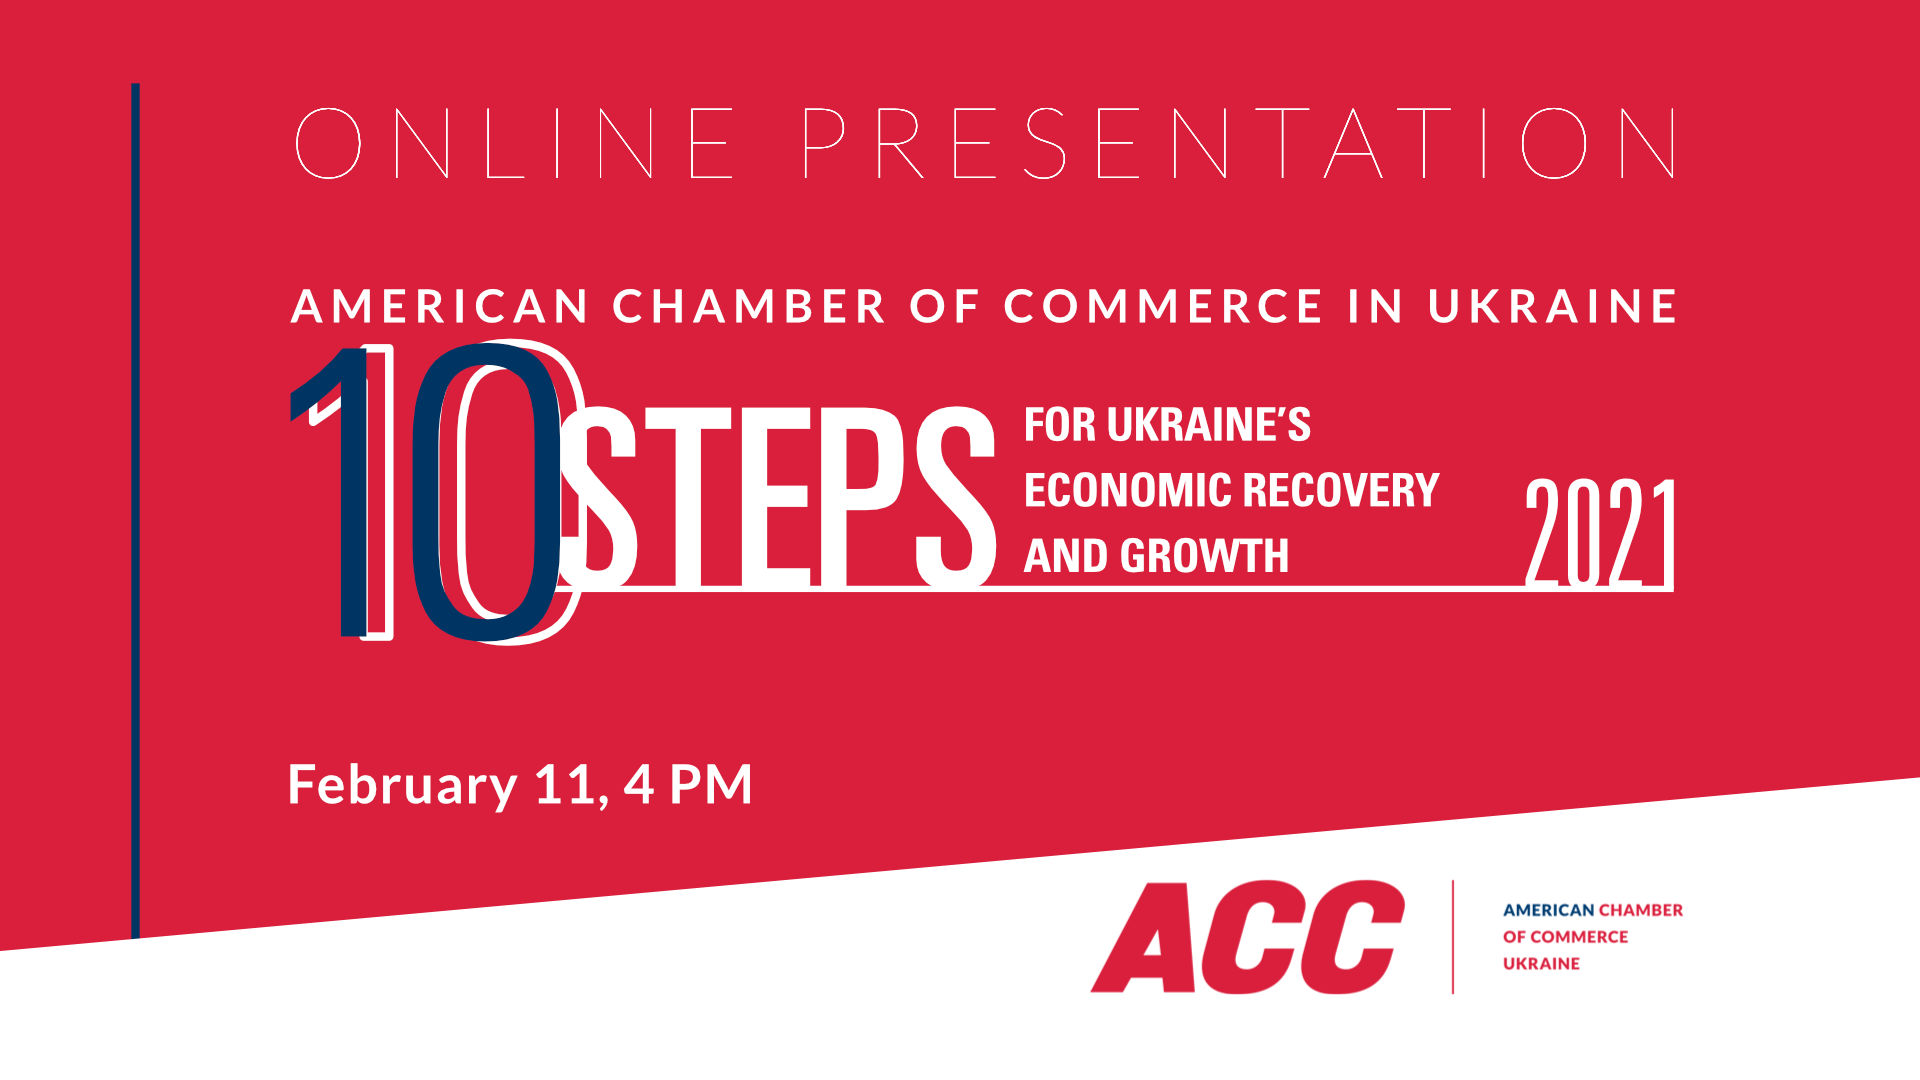 Online Presentation of 10 Steps for Ukraine's Economic Recovery and Growth